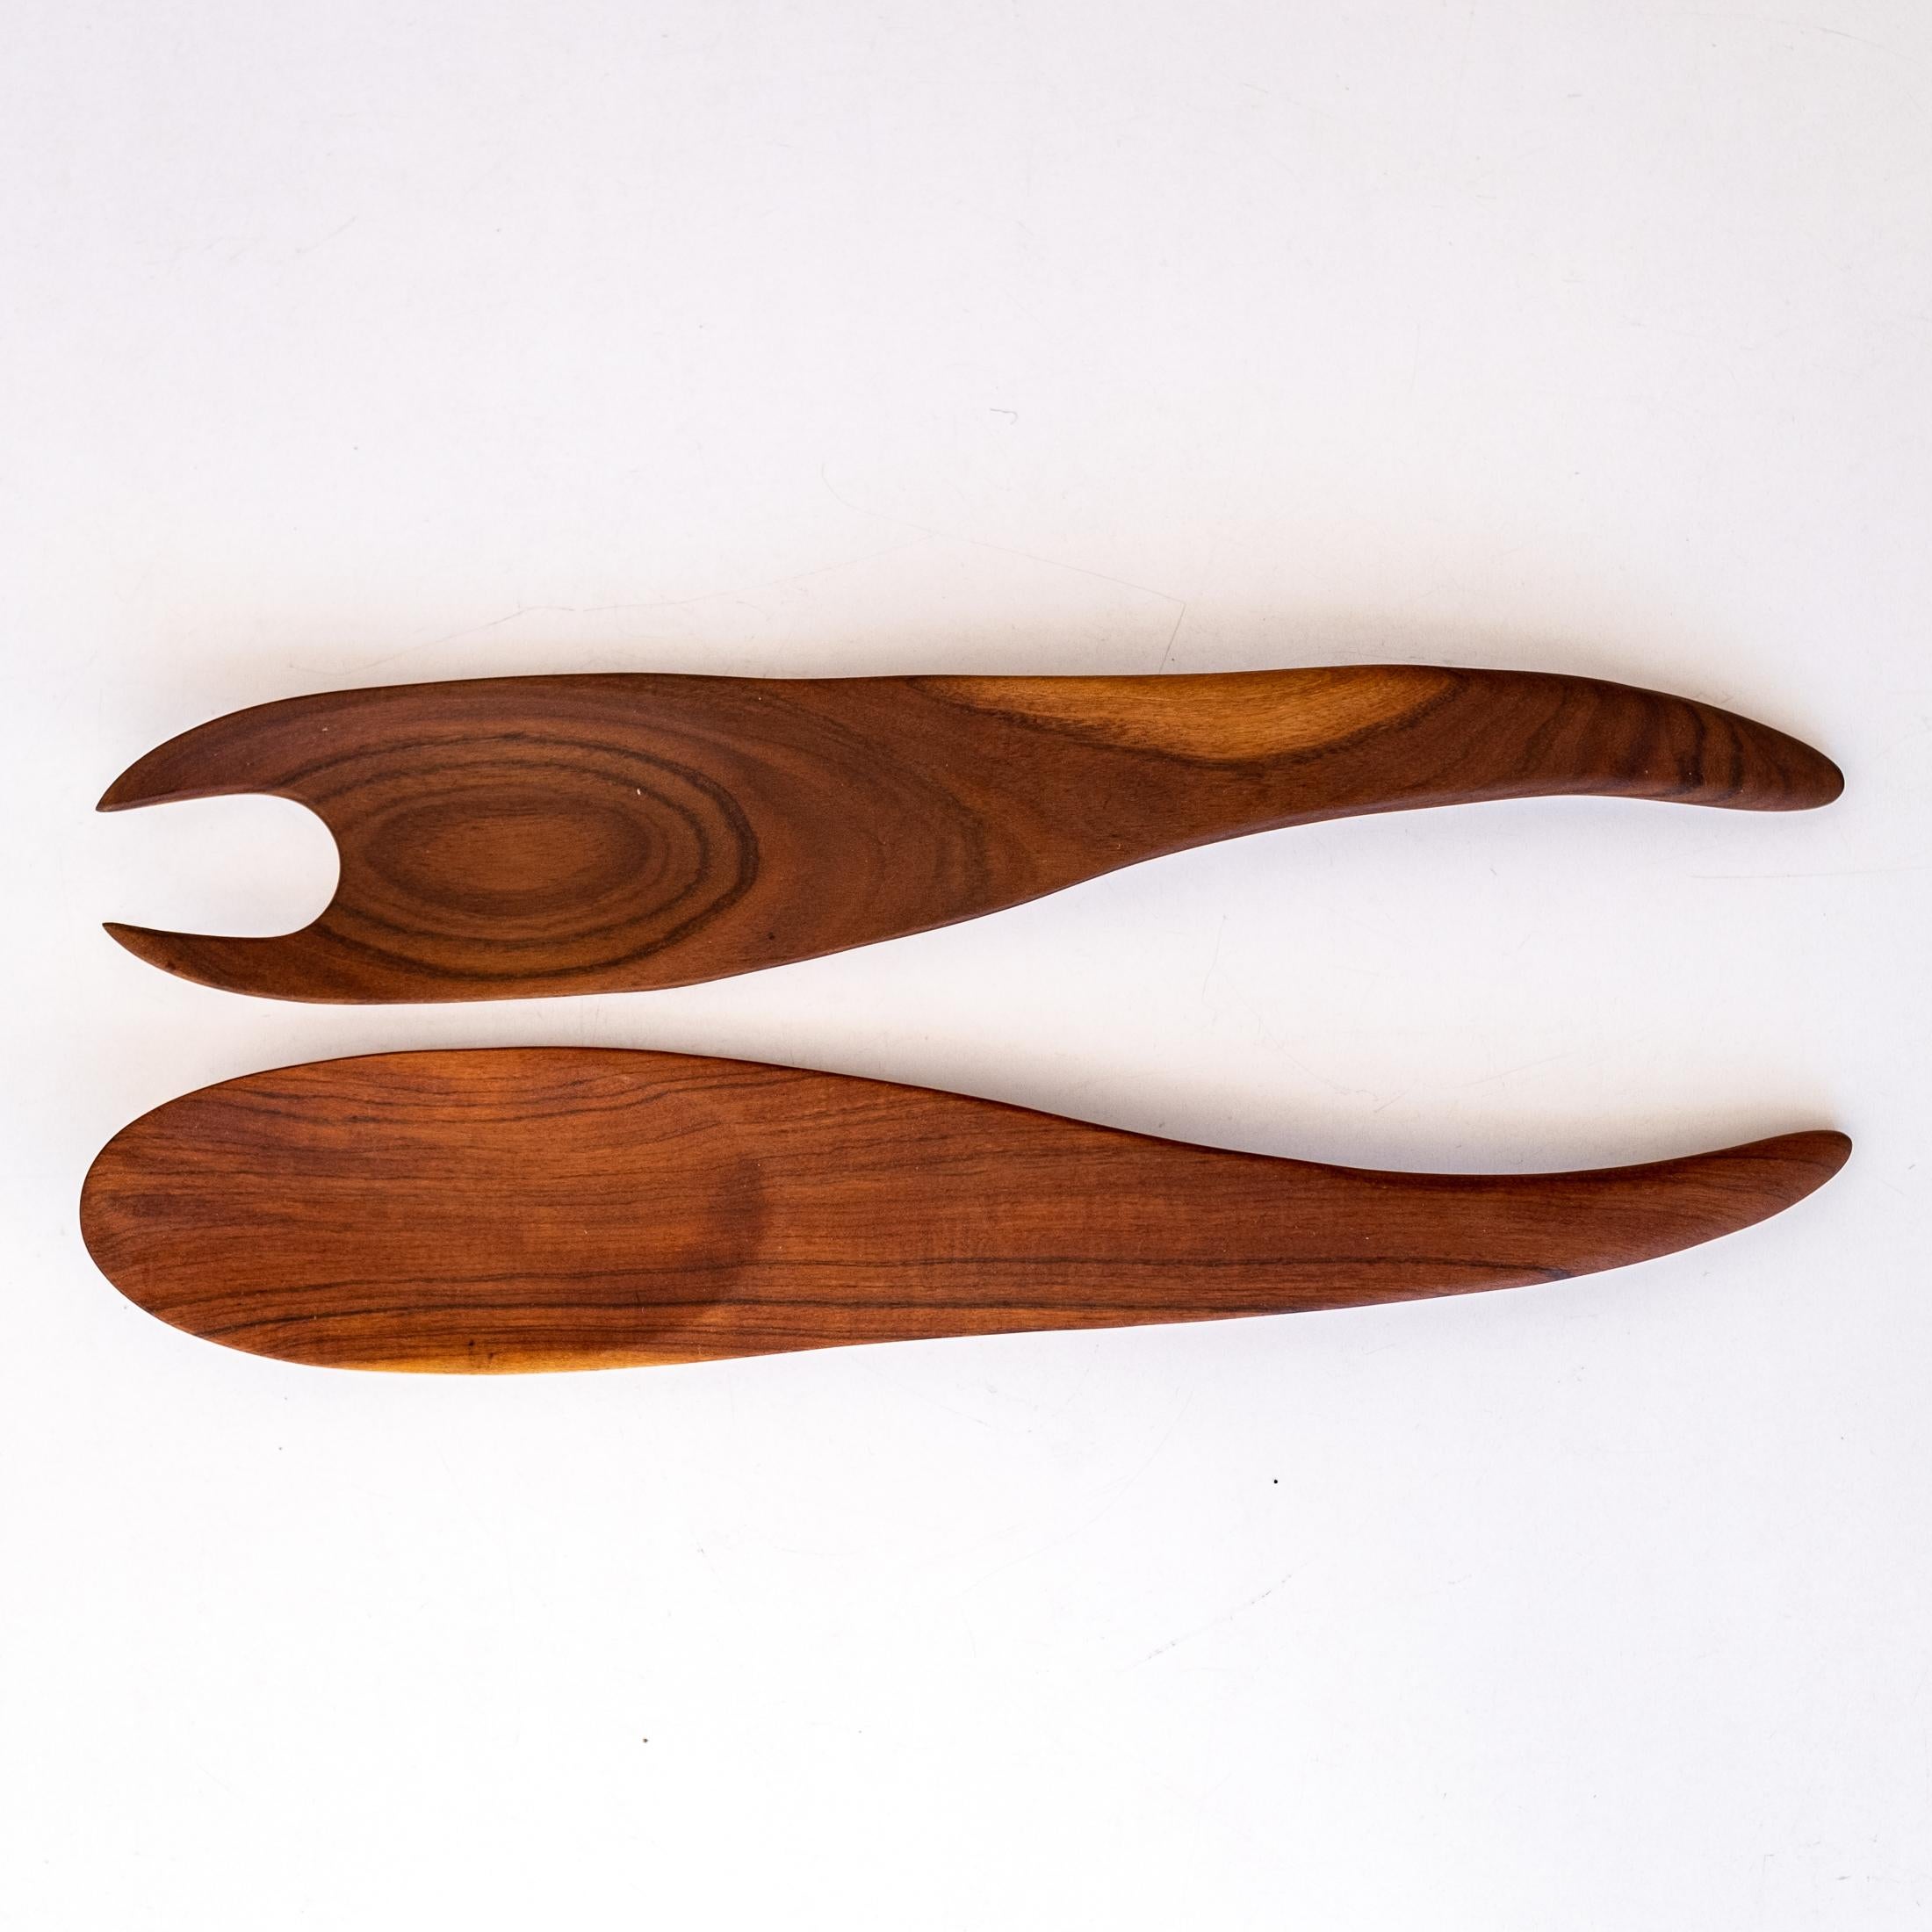 Servers or tongs by Mexican Modernist Don Shoemaker, from his workshop in Señal Mexico. The servers came as a set with other Shoemaker pieces listed separately. 

Designer Don Shoemaker ( was born in Nebraska and studied at the Art Institute of